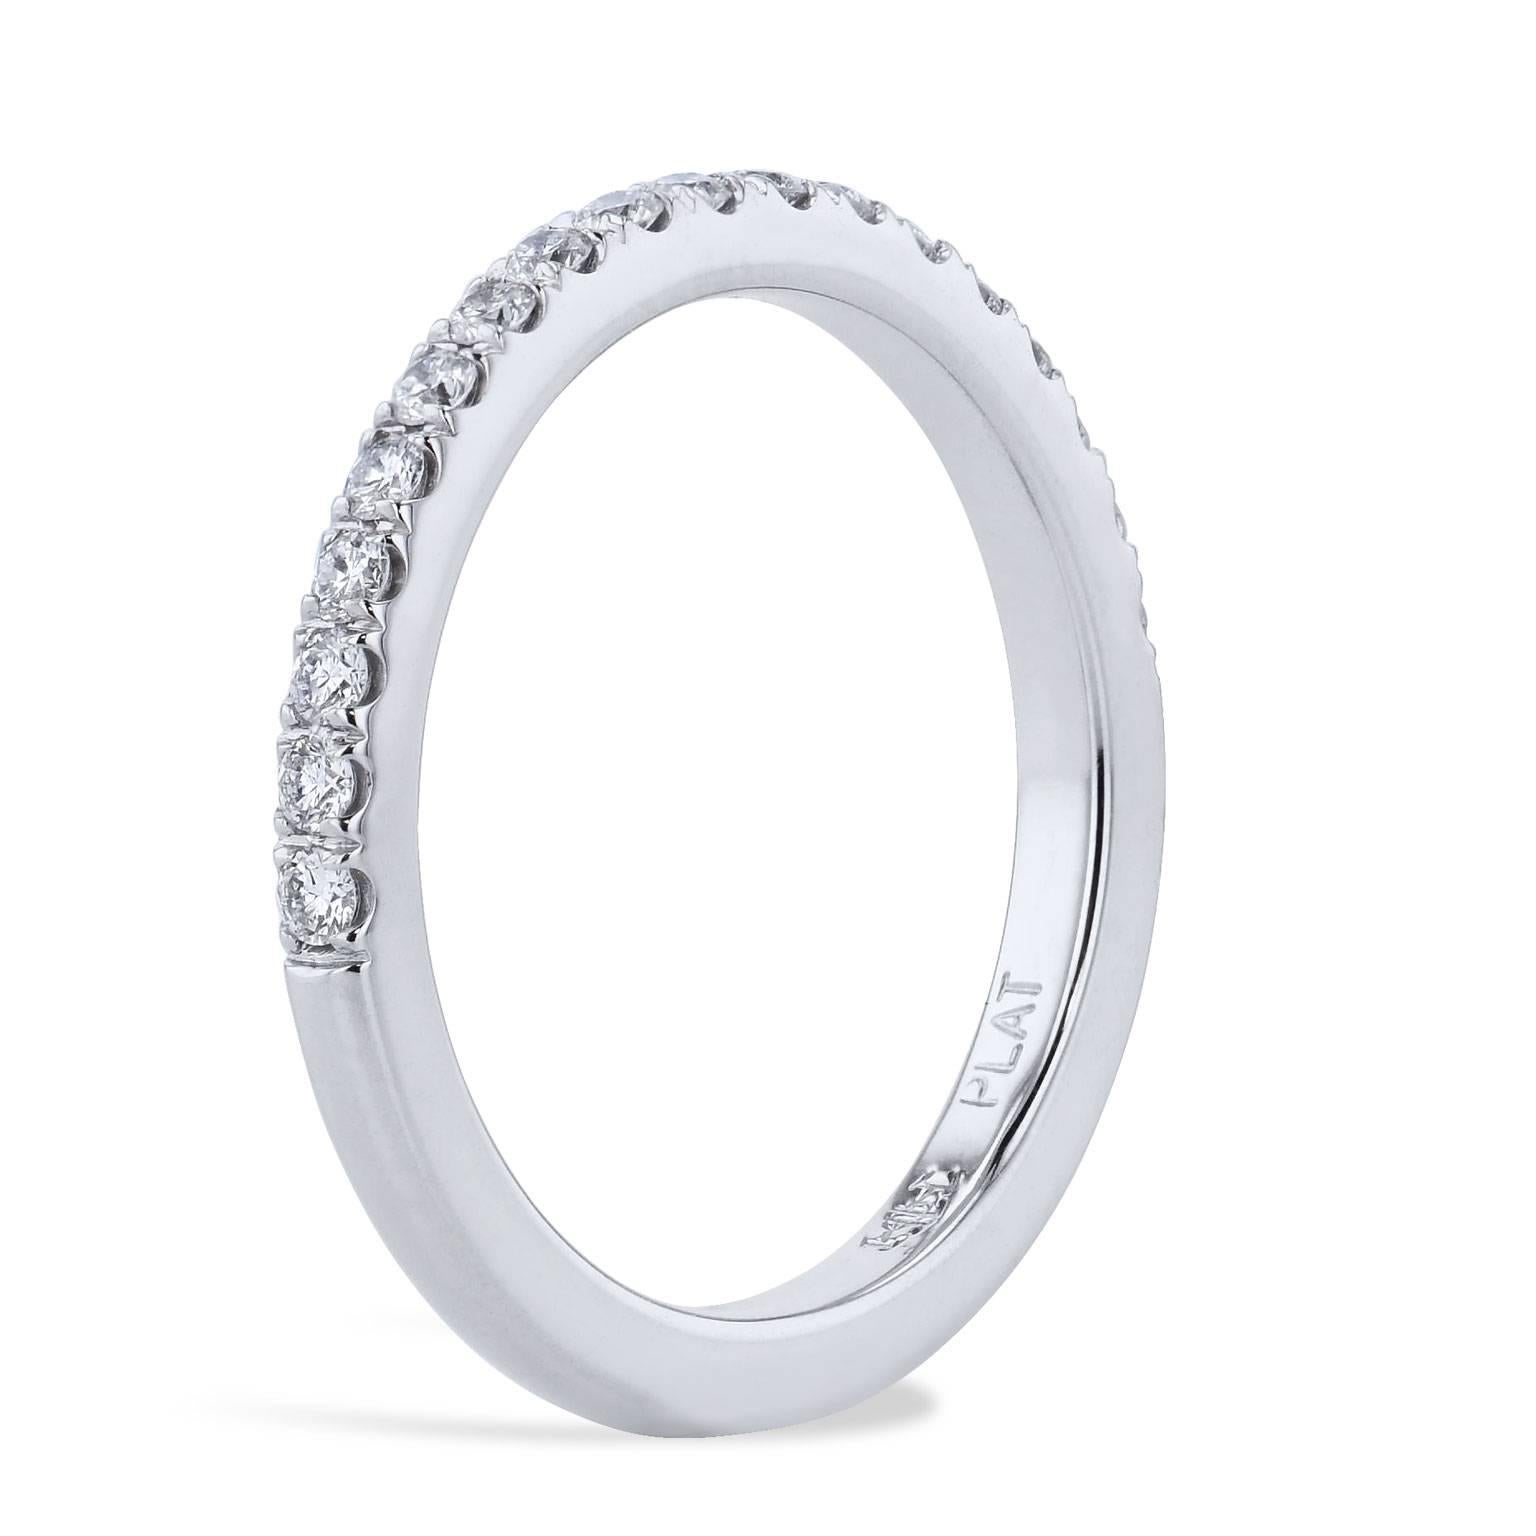 Eighteen pave-set diamond with a total weight of 0.25 carat (F/G/VS) are affixed to a platinum band that is 2.00 millimeter thick. This handmade band ring is as lovely as she.